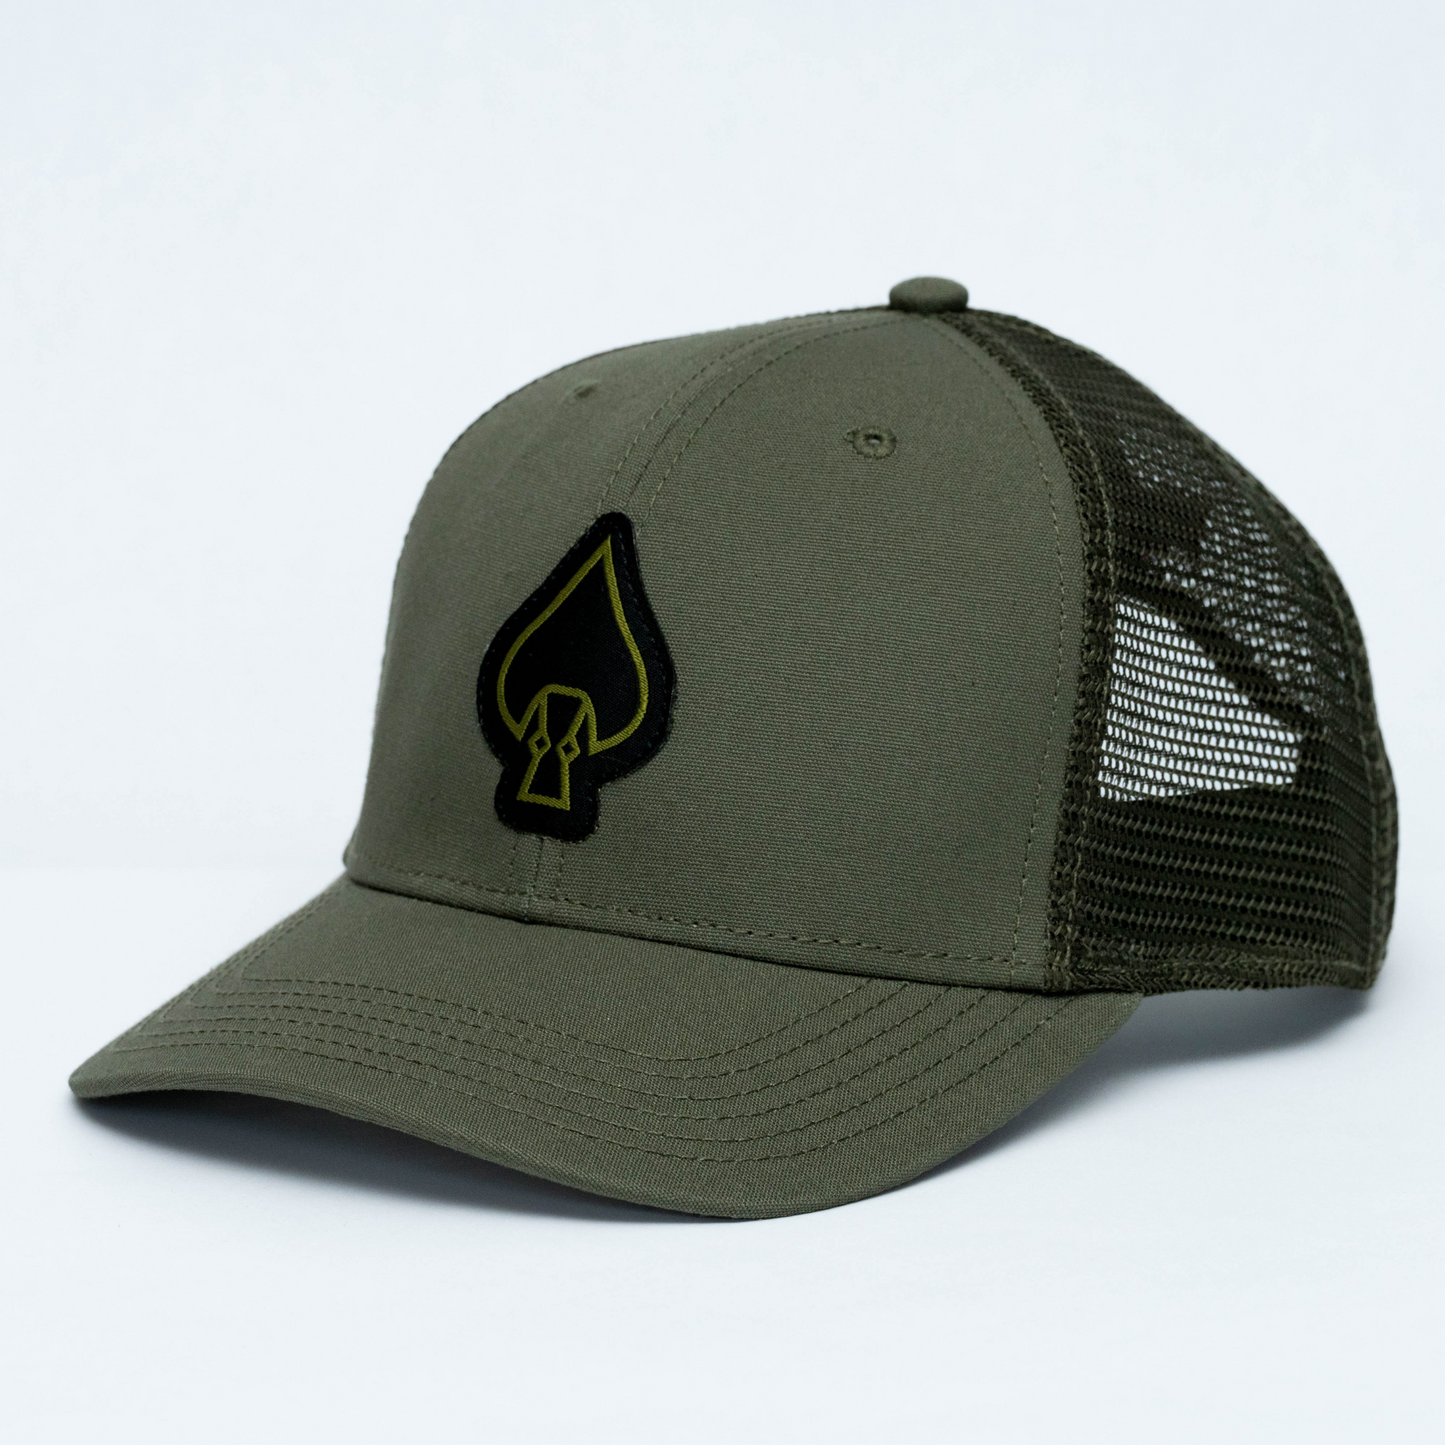 W.O.E. Spearhead Trucker Hat - Available NOW